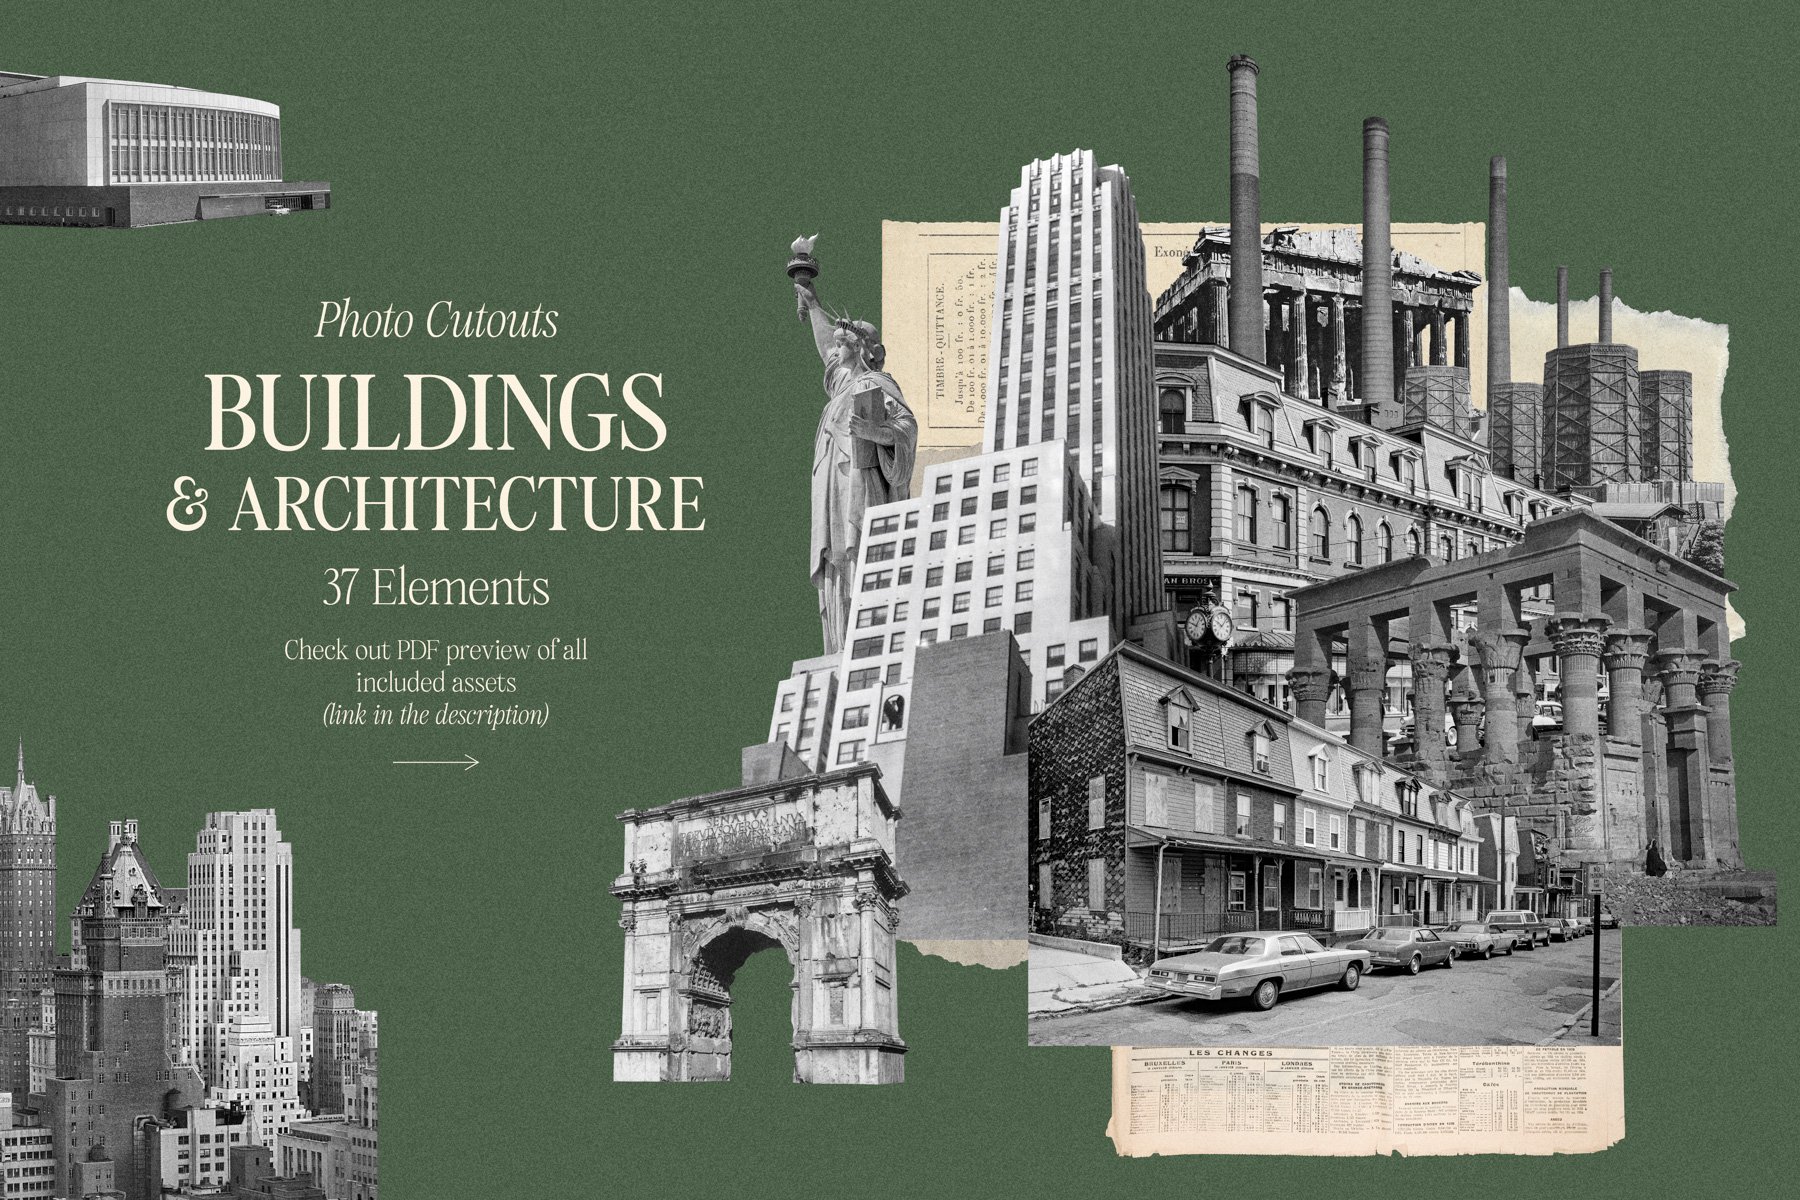 Building and architectures collection.